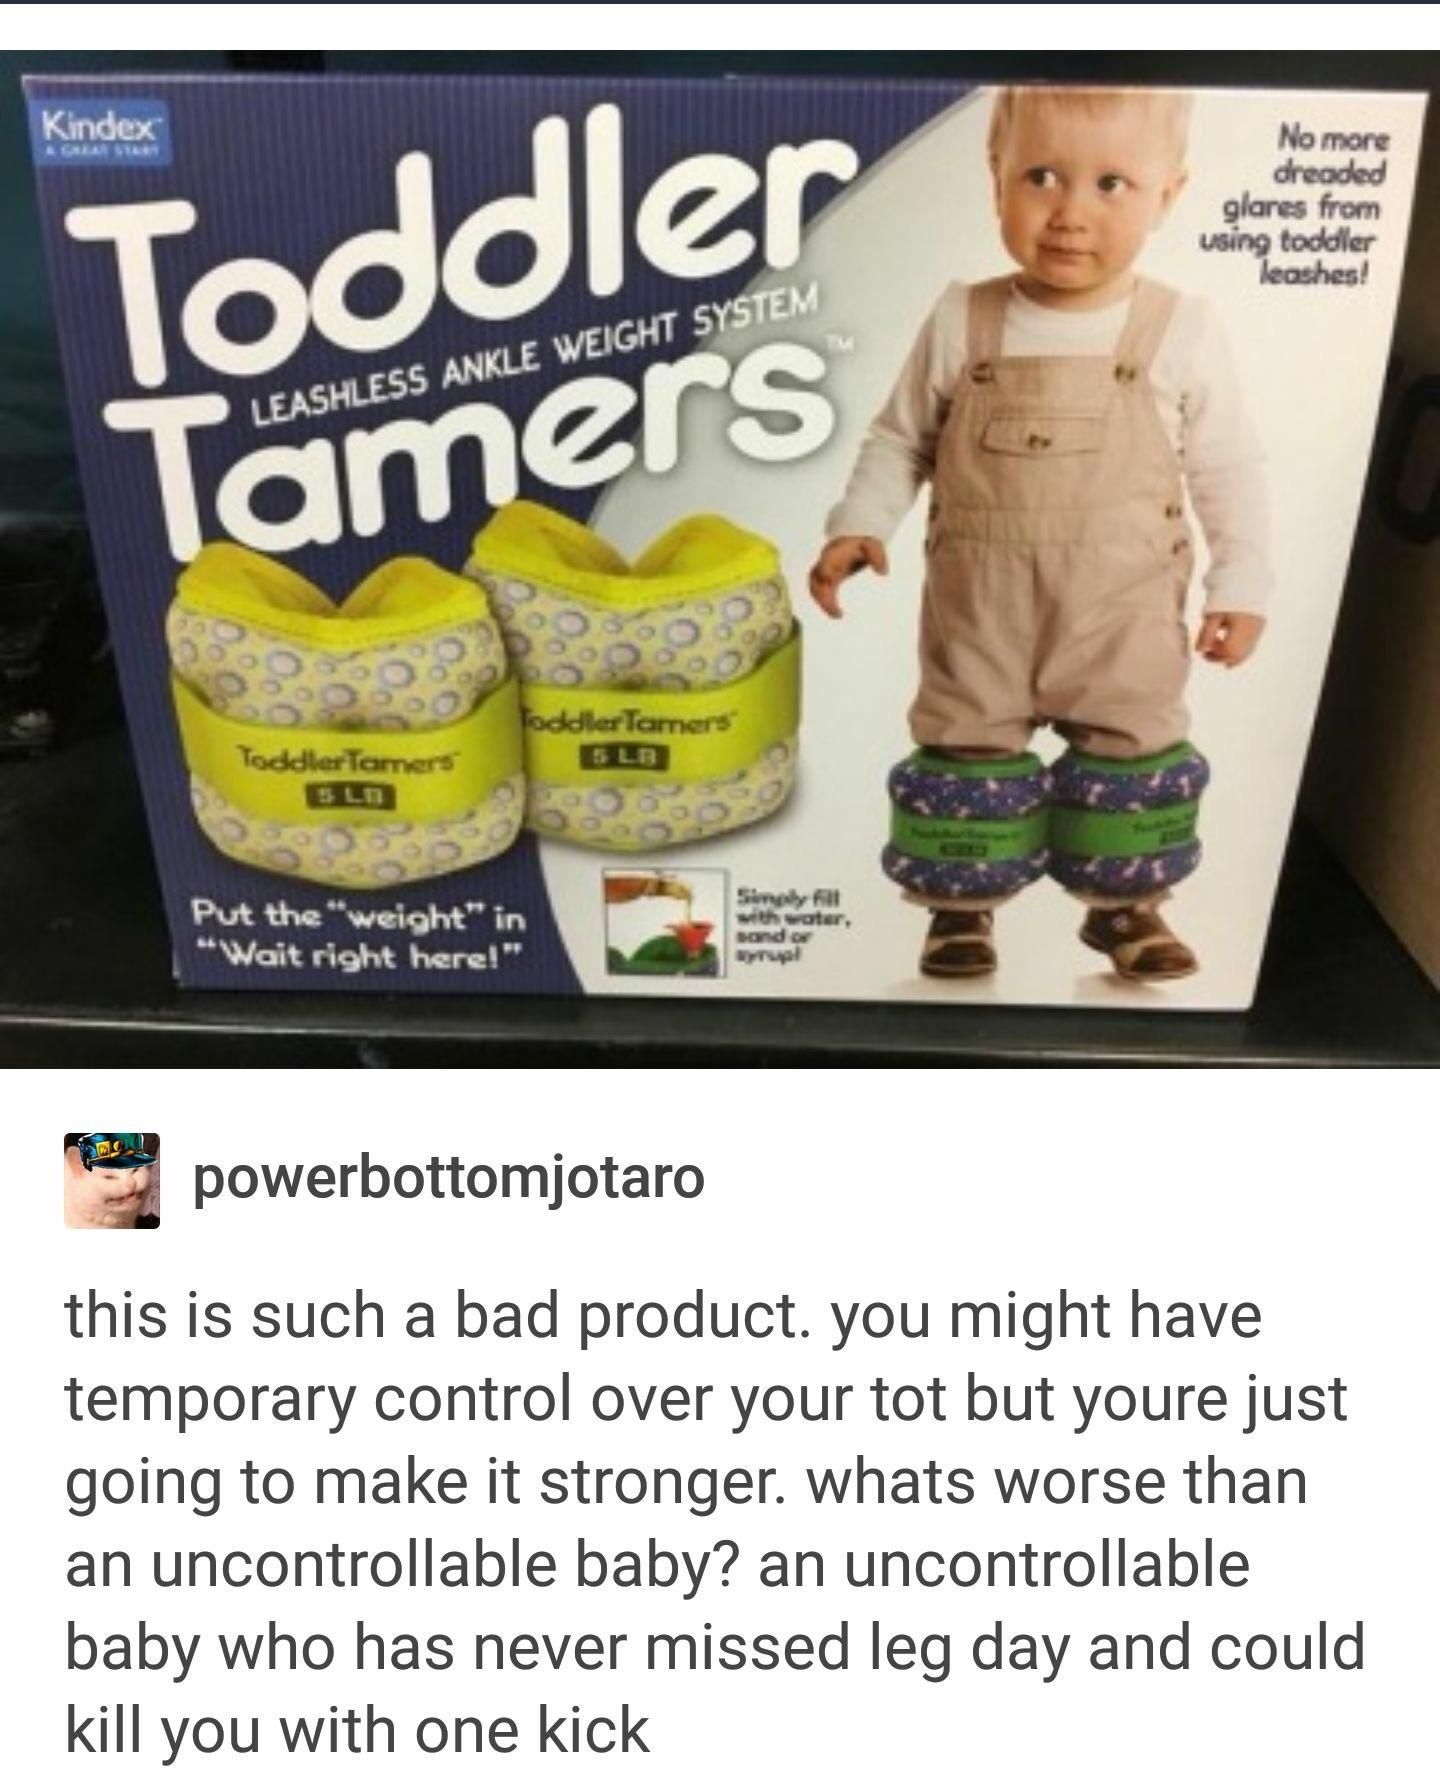 toddler tamers meme - Kindex Toddlers No more dreaded glares from using toddler leashes! Leashless Ankle Weight System Tamers Toddler Tarners Toddler Temers Put the "weight" in "Wait right here!" with water, ondor wyl powerbottomjotaro this is such a bad 